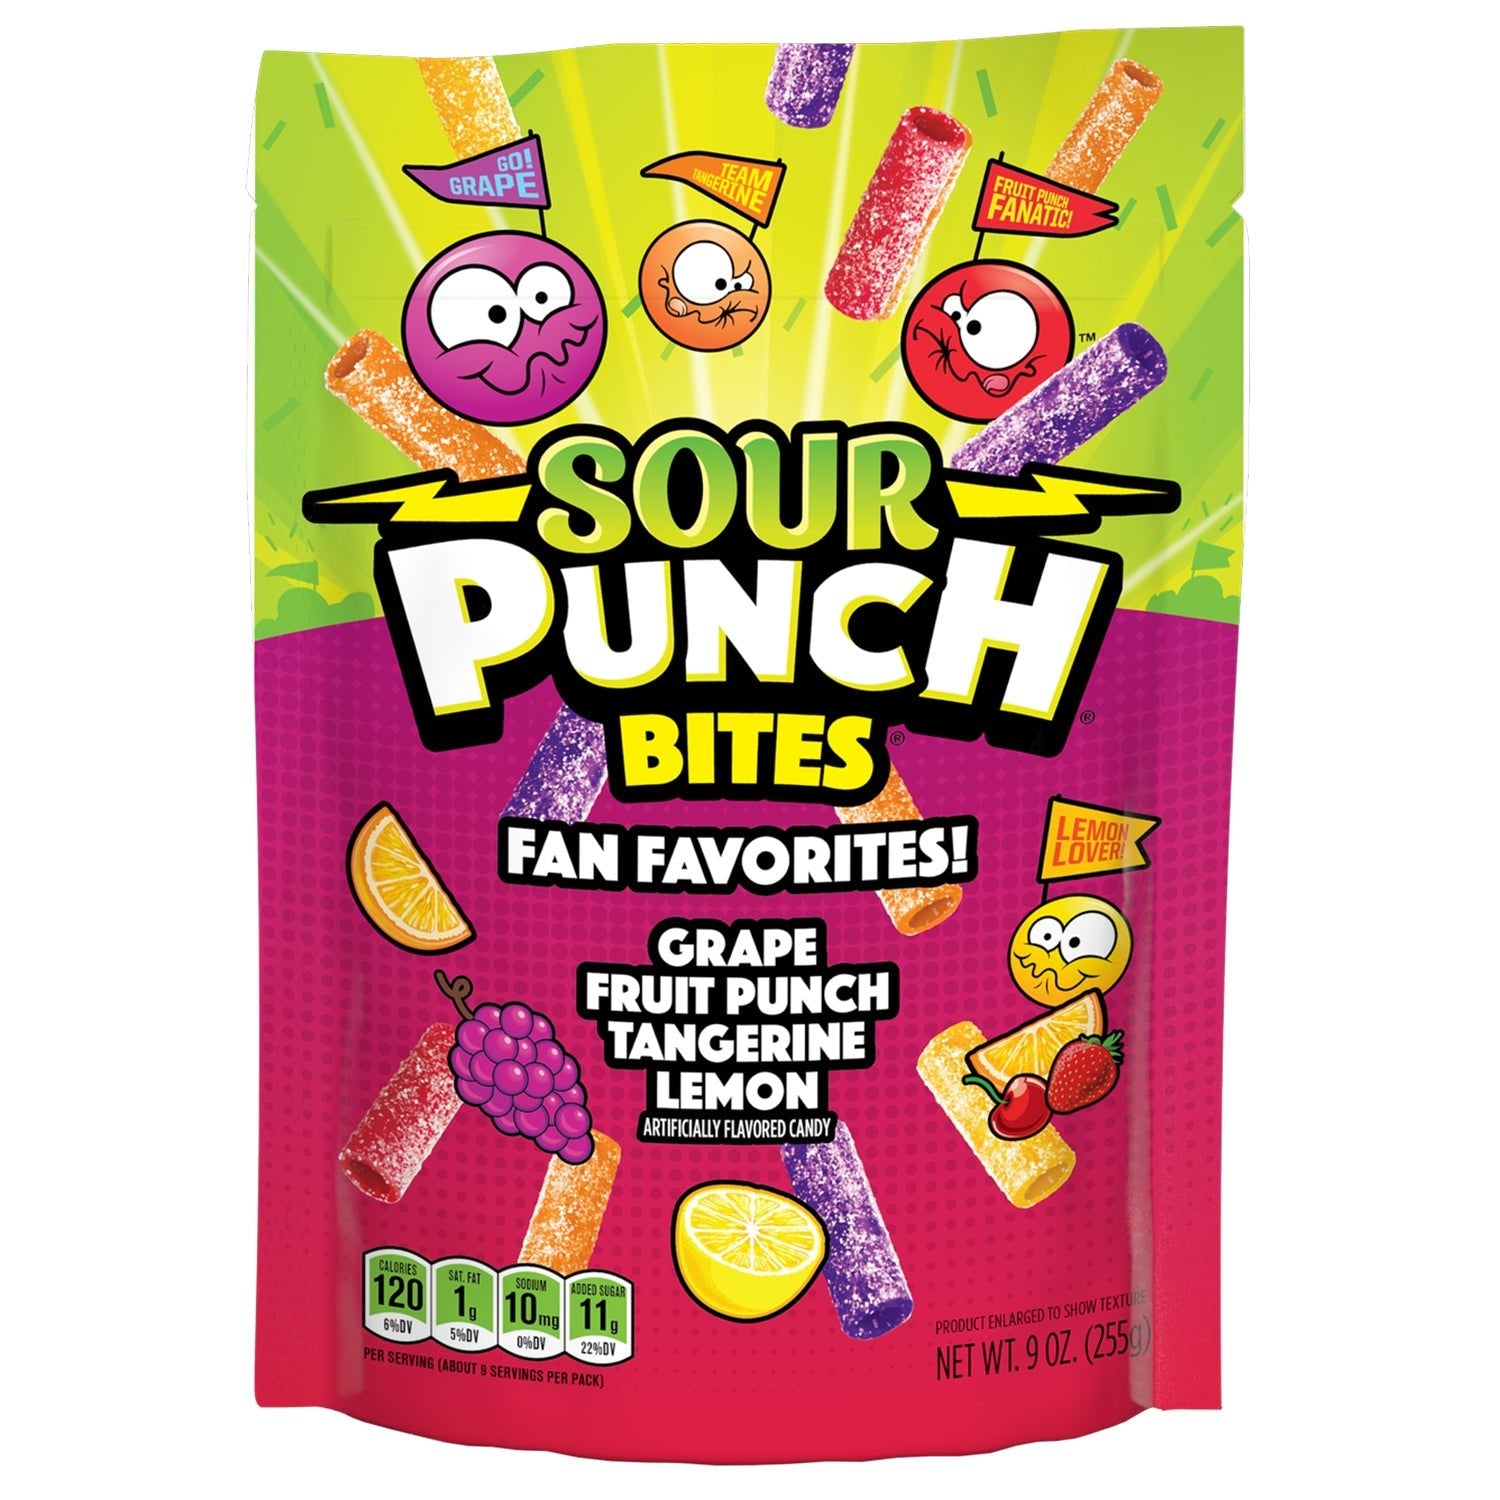 Sour Punch Bites Fan Favorites Front of Package - Chewy Candy Favorites - Fruit Punch Candy, Tangerine Candy, Grape Candy, Lemon Candy